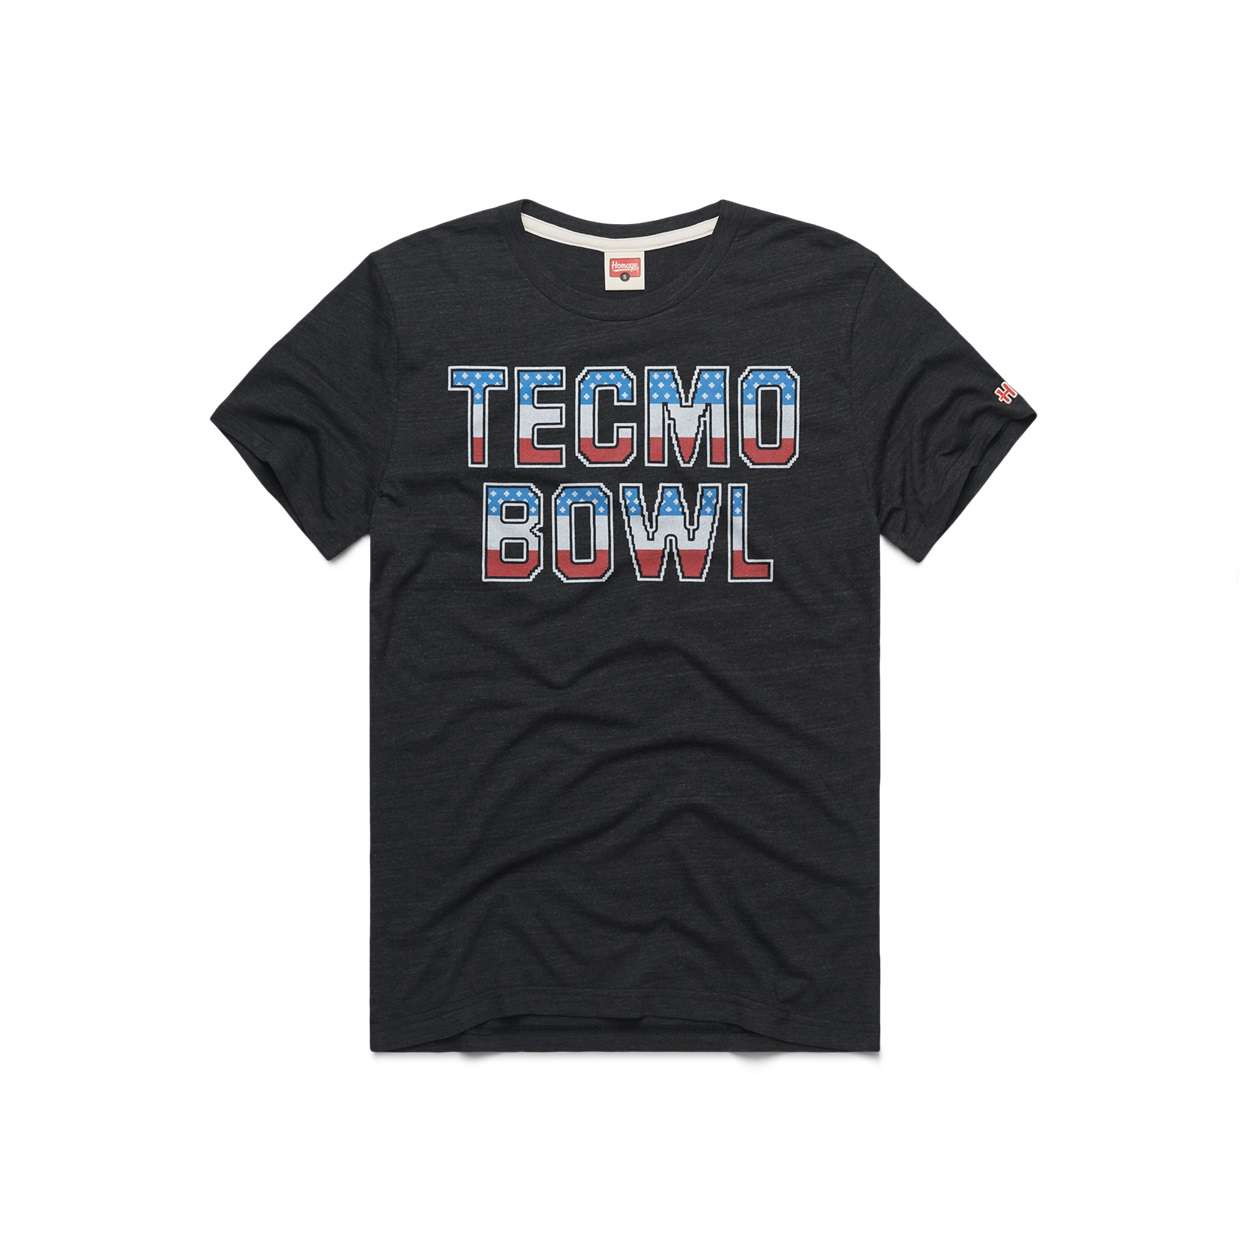 HOMAGE Teams Up with Publisher KOEI TECMO to Deliver the Official Apparel Line for Tecmo Bowl